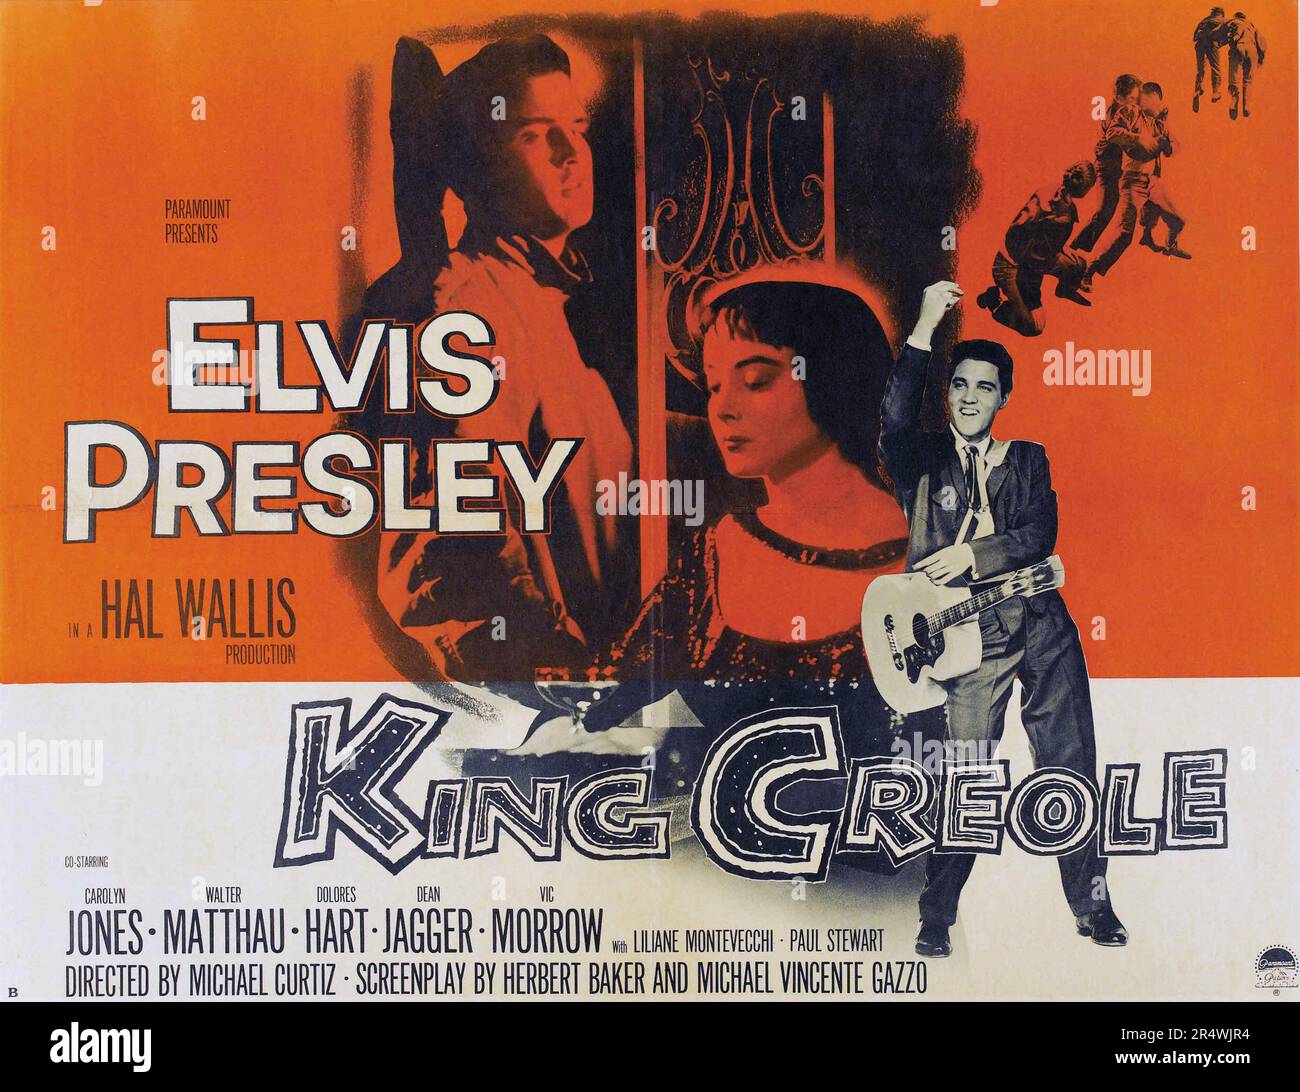 King Creole is a 1958 American musical drama film directed by Michael Curtiz and starring Elvis Presley, Carolyn Jones, and Walter Matthau. It was based on the 1952 novel A Stone for Danny Fisher by Harold Robbins and the film is about a nineteen-year-old who gets mixed up with crooks and involved with two women. Stock Photo